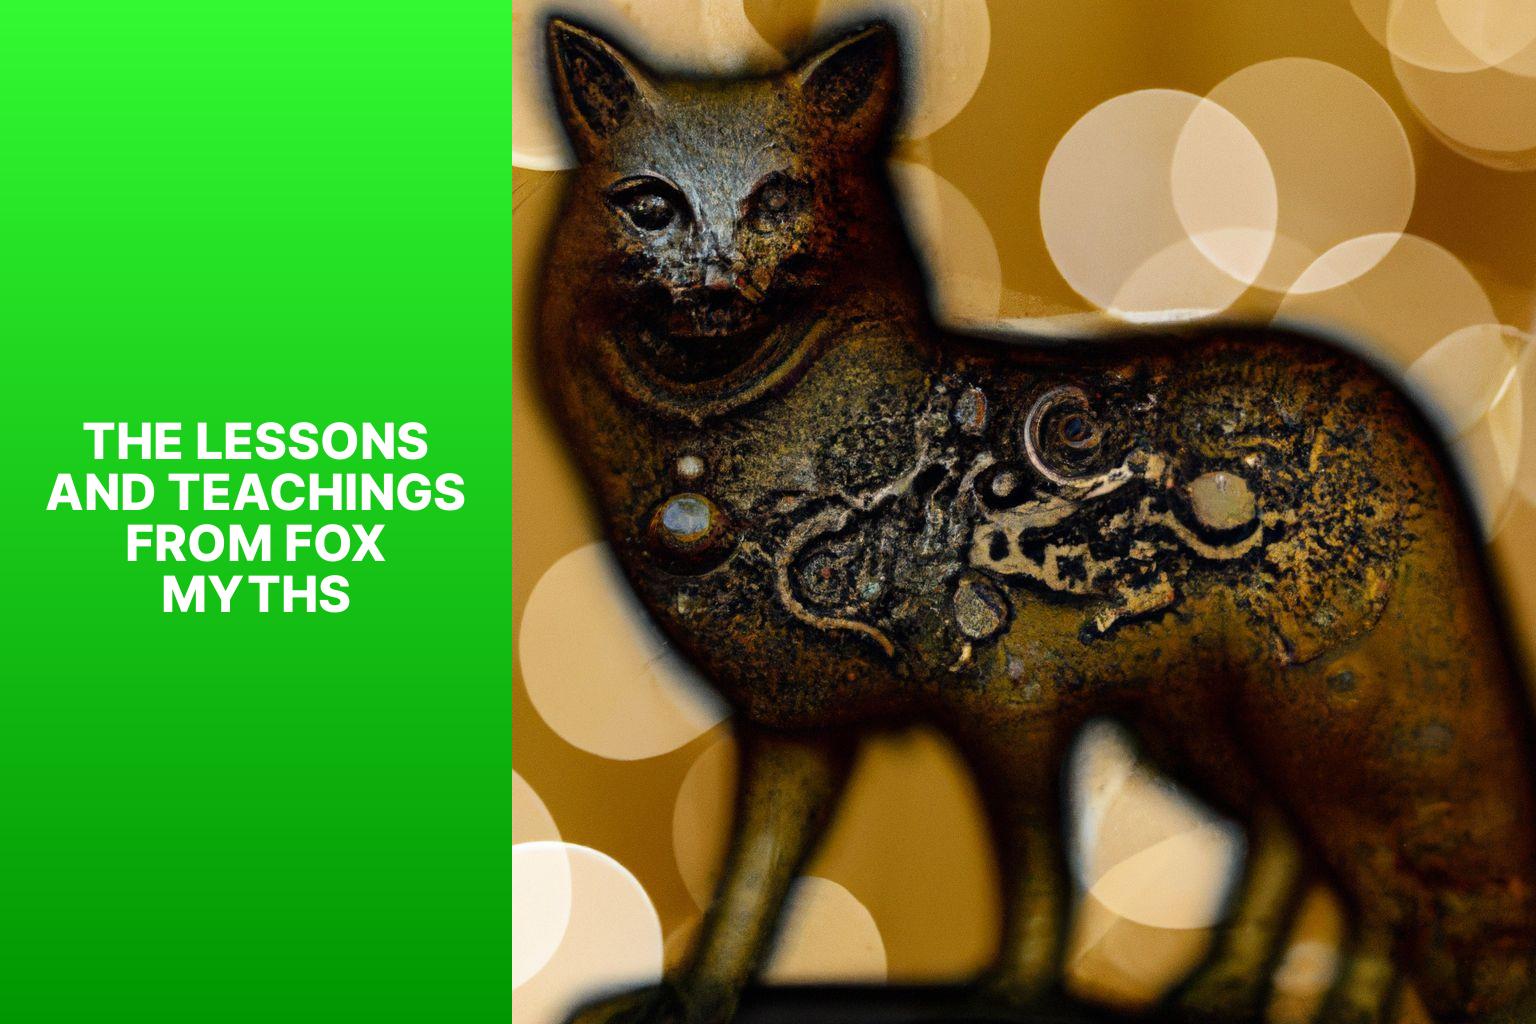 The Lessons and Teachings from Fox Myths - Fox Myths in Jainism 